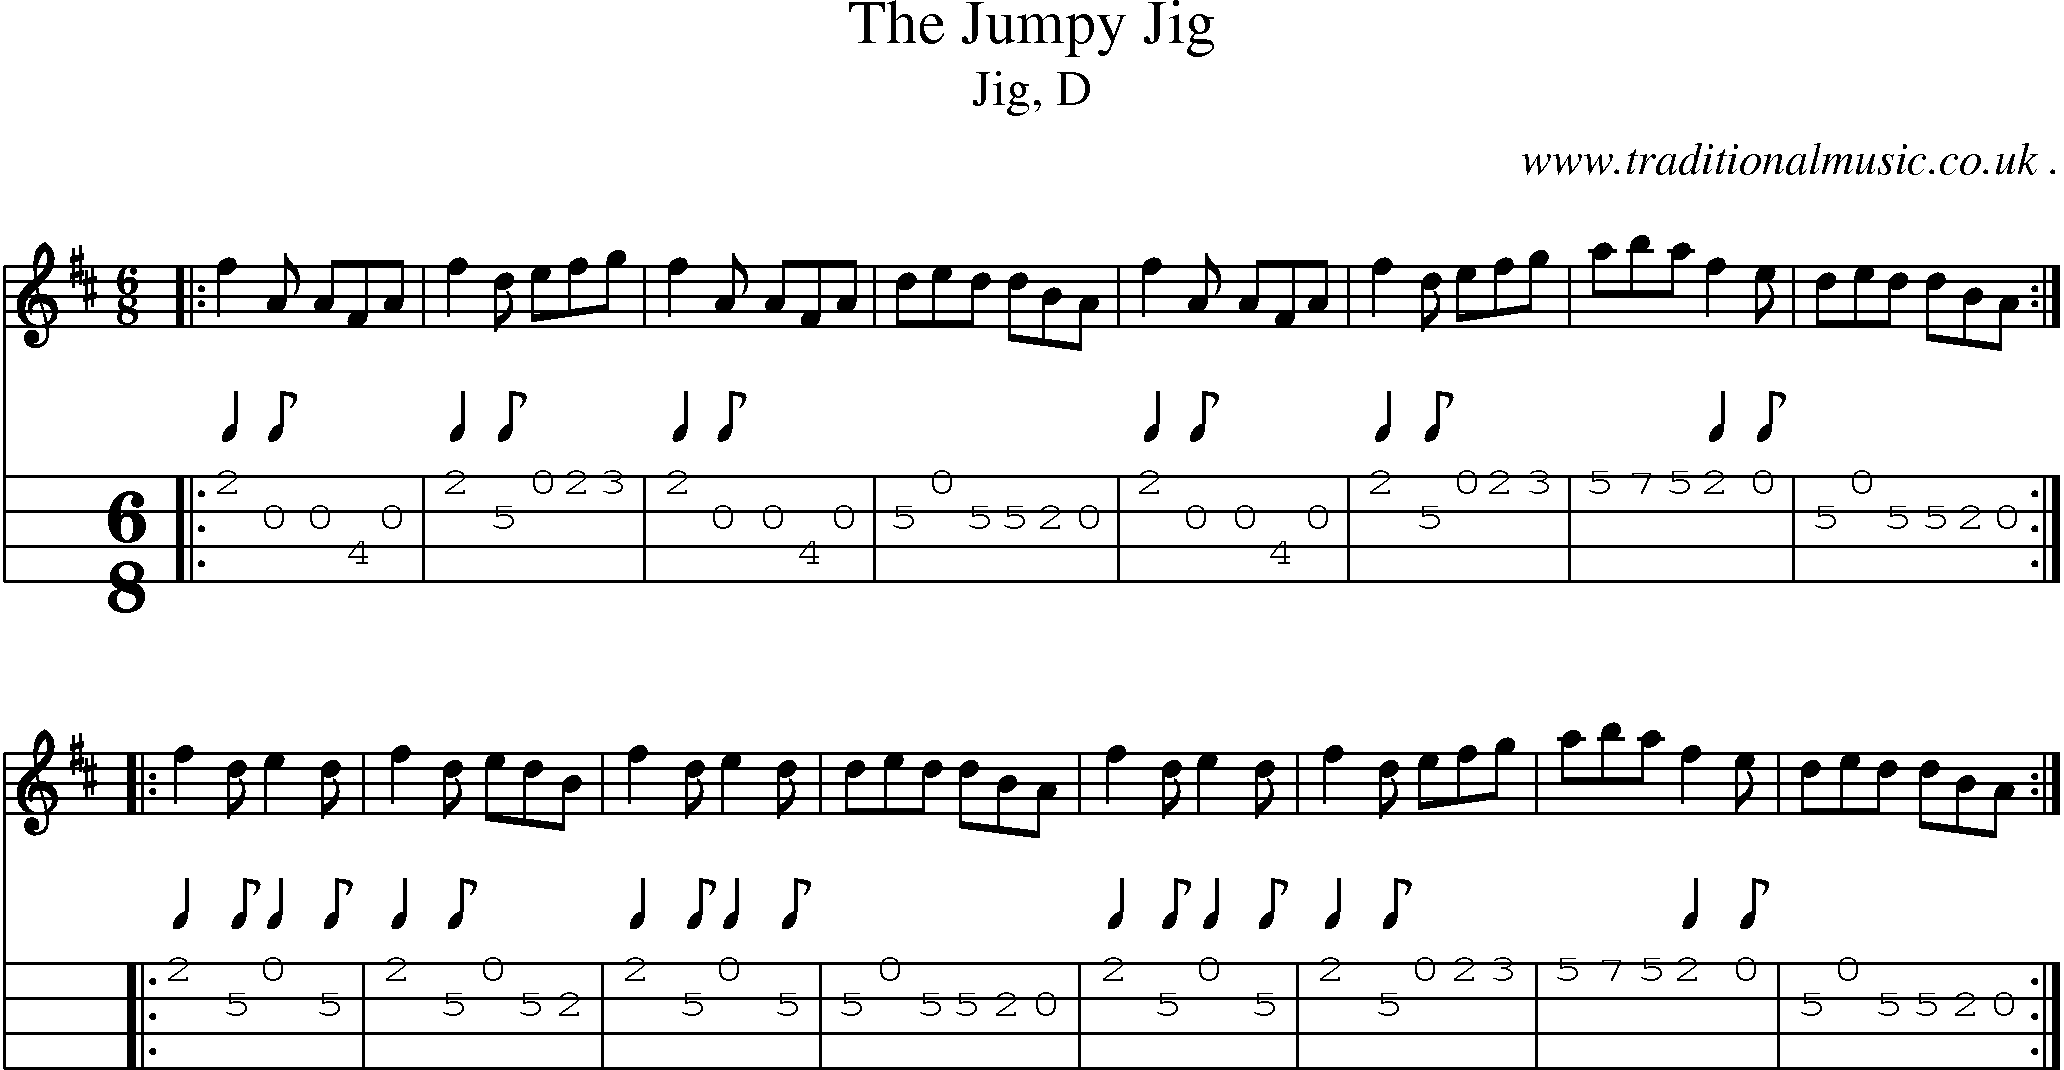 Sheet-music  score, Chords and Mandolin Tabs for The Jumpy Jig